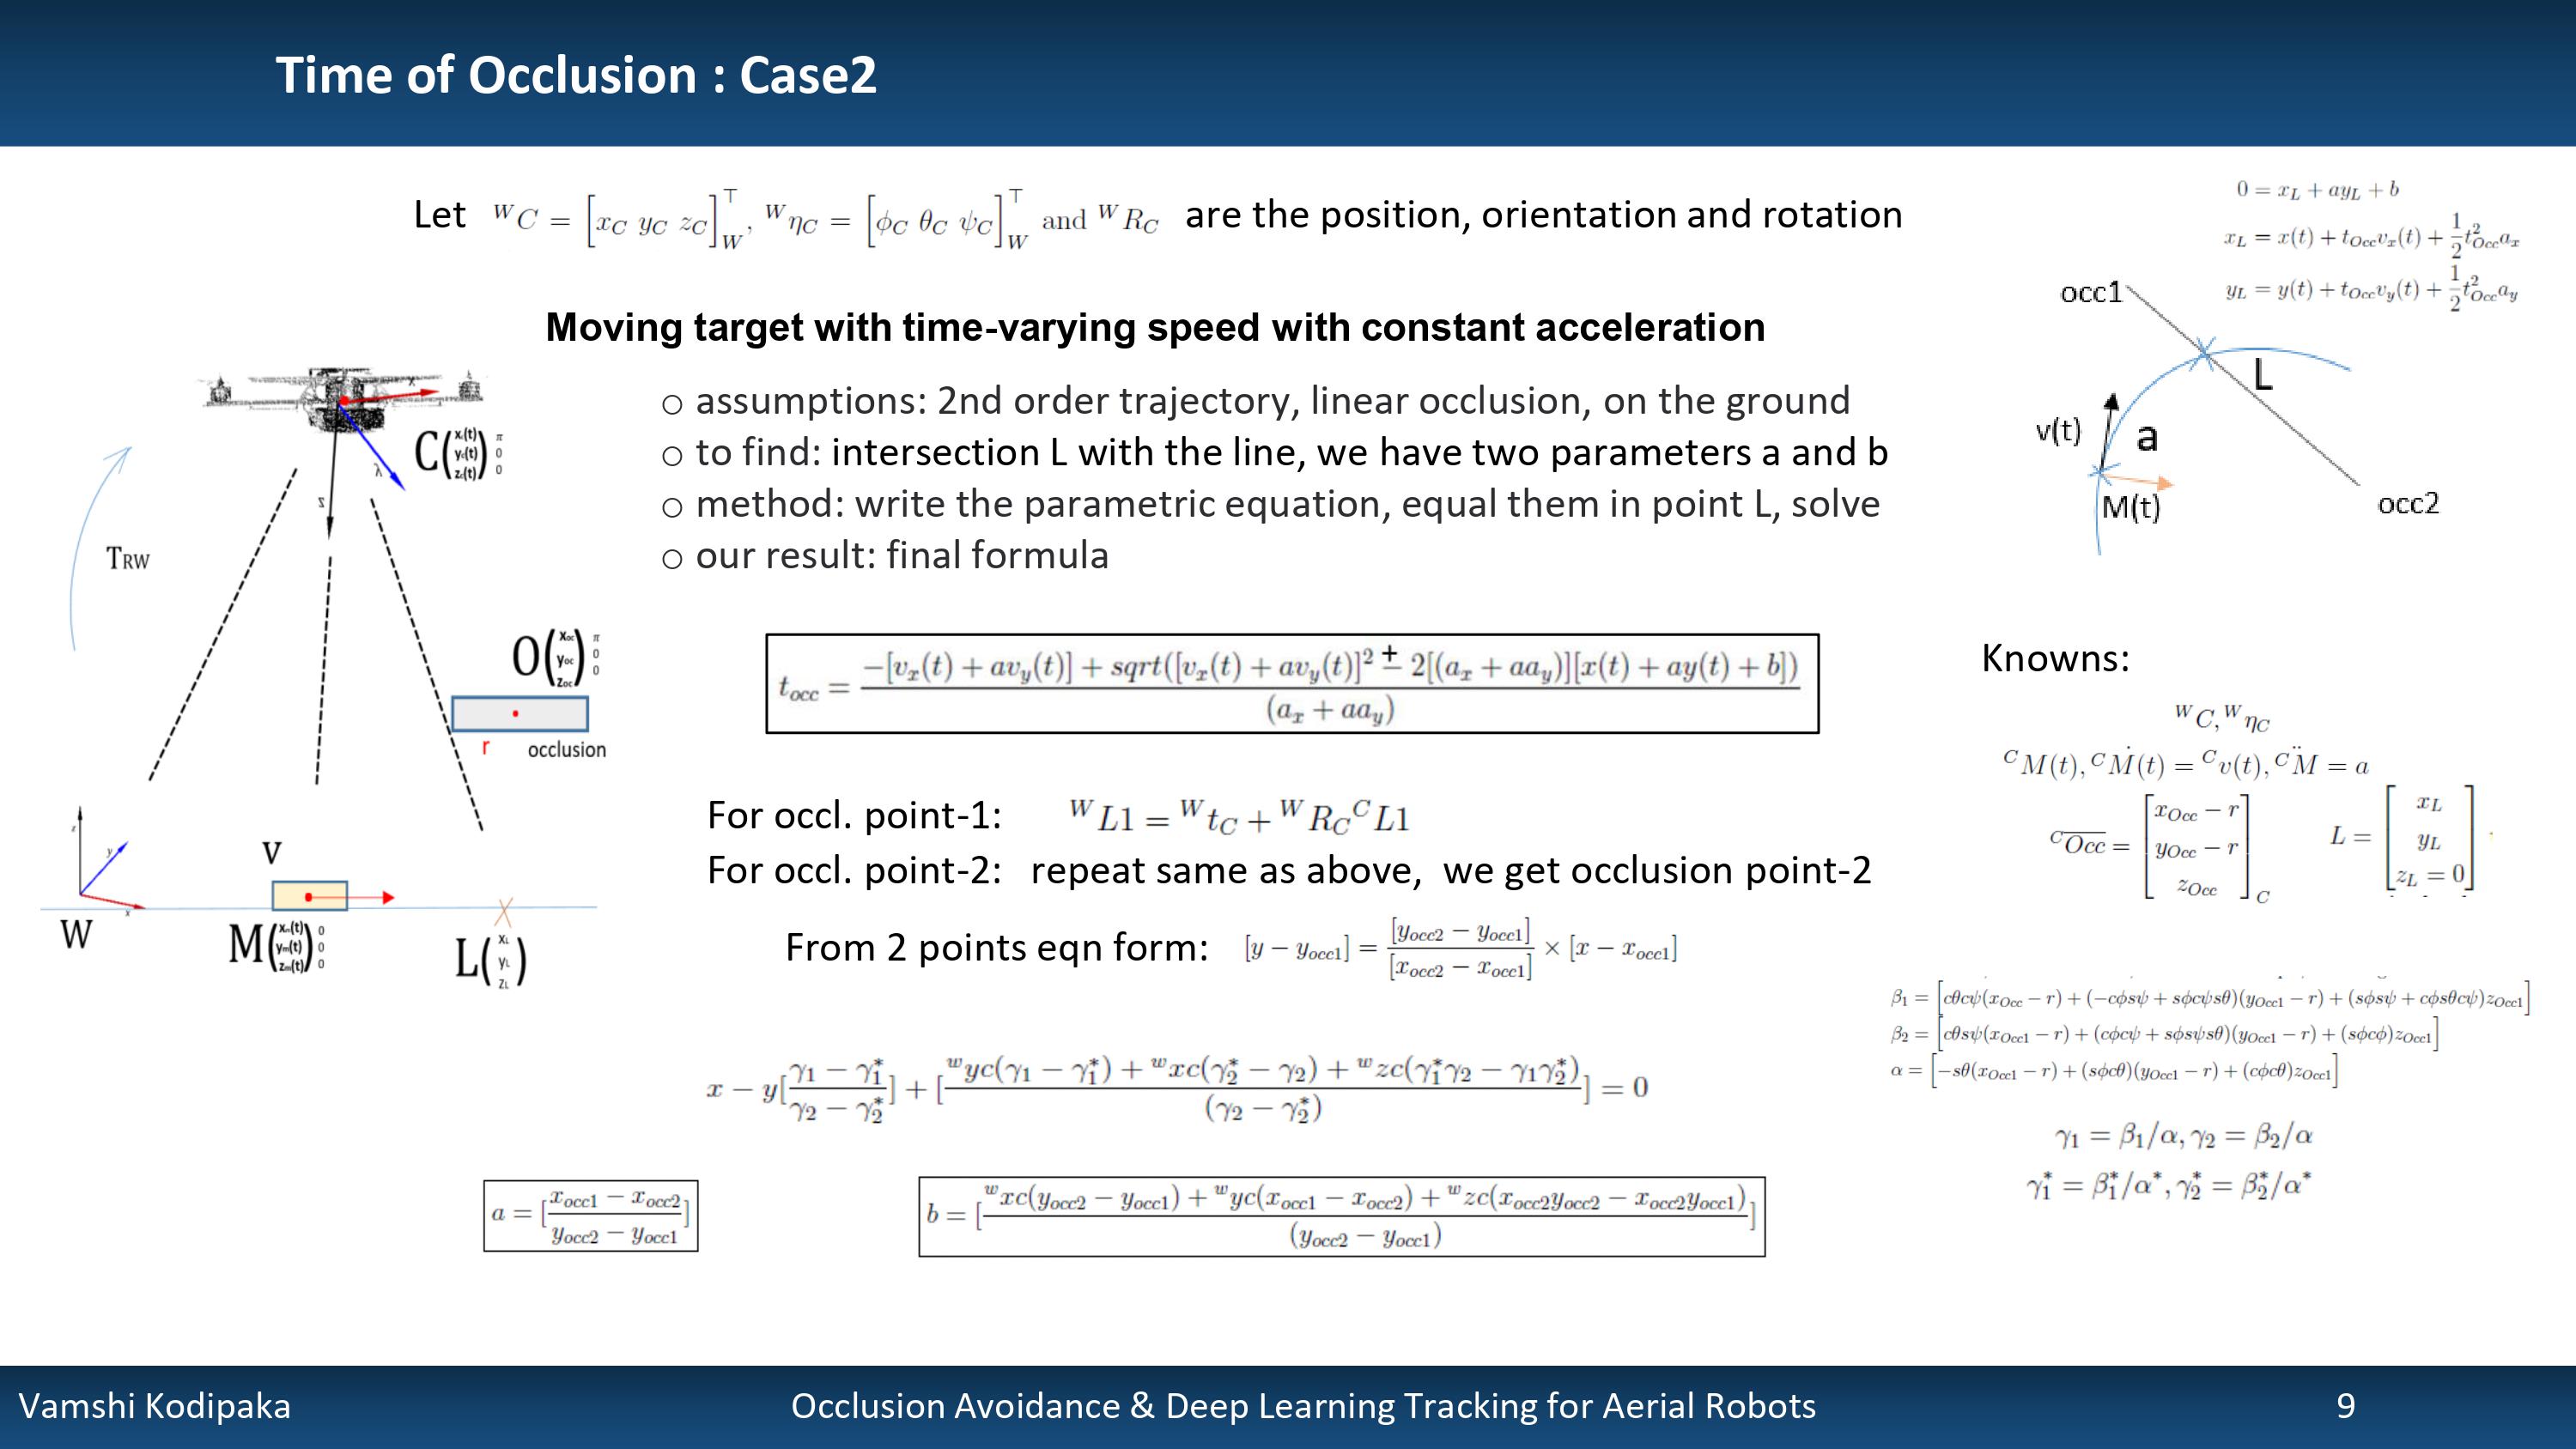 CASE-2: Moving target with time-varying speed with constant acceleration